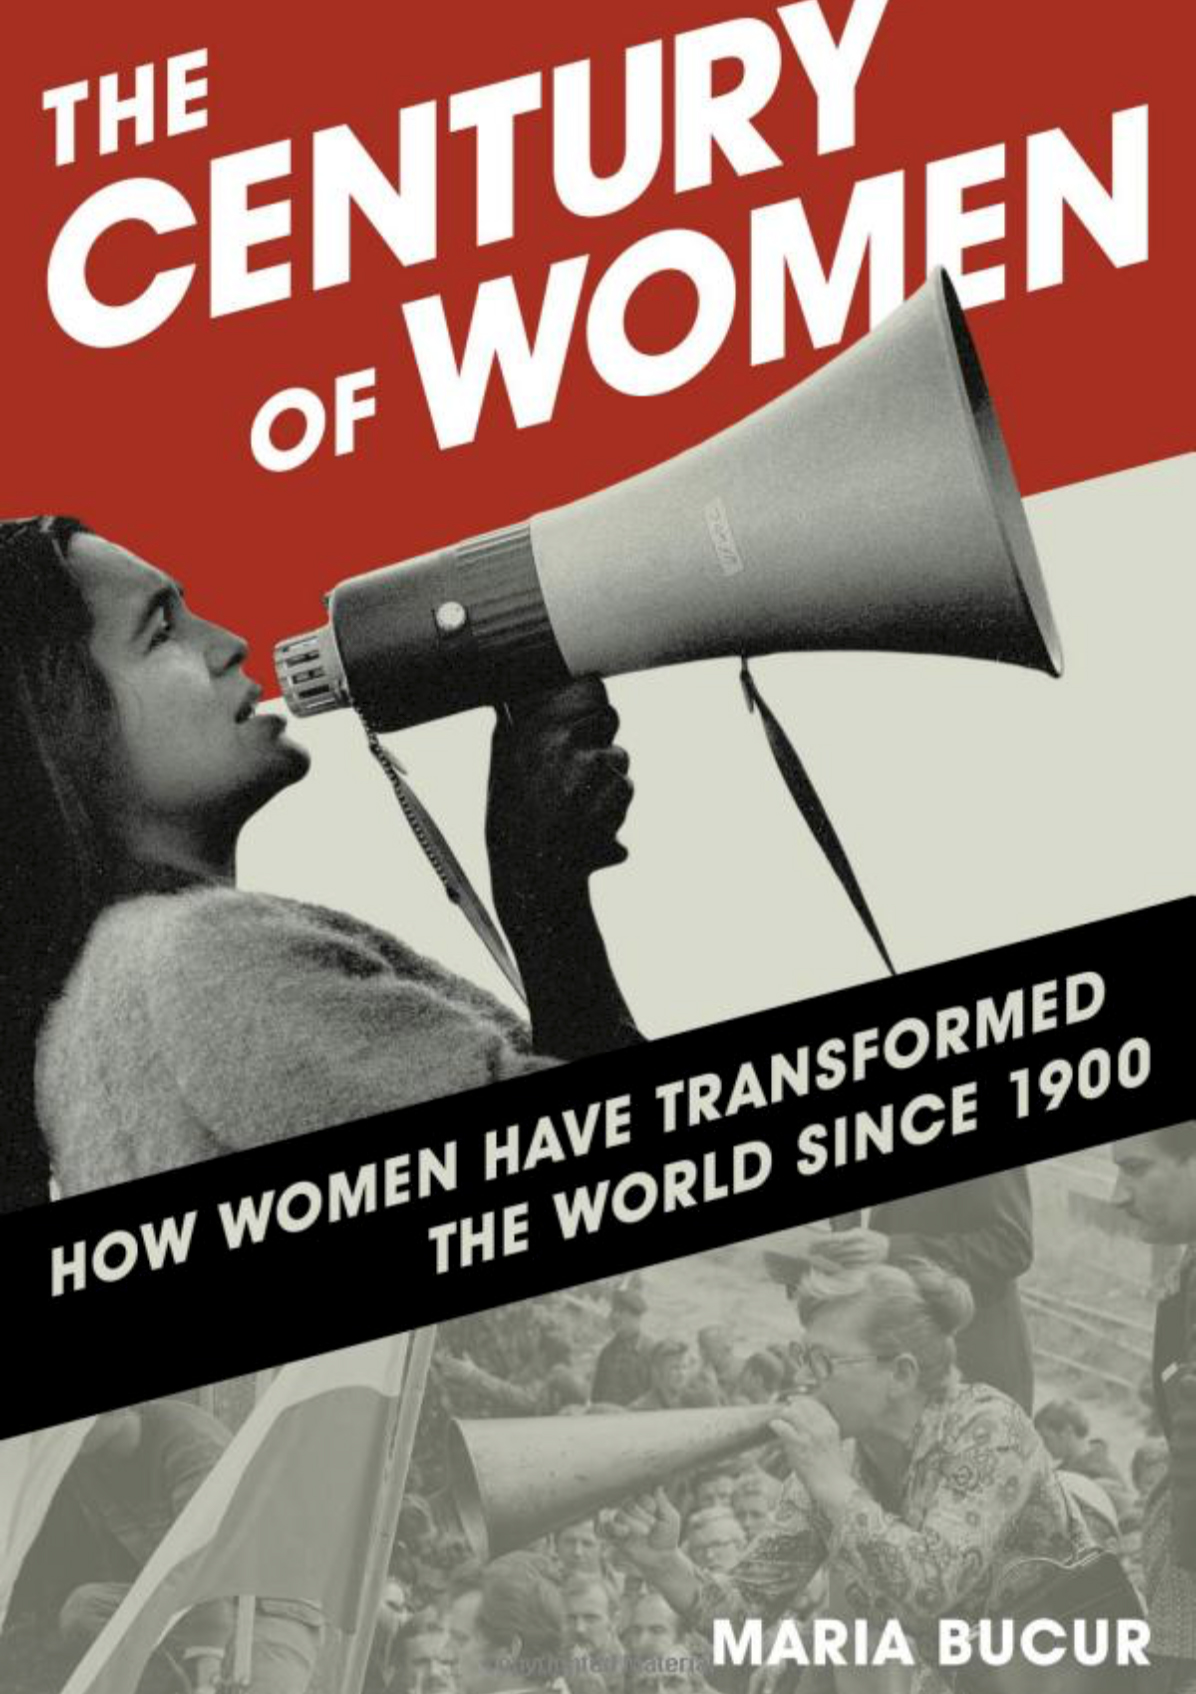 The Century of Women: How Women Have Transformed the World since 1900